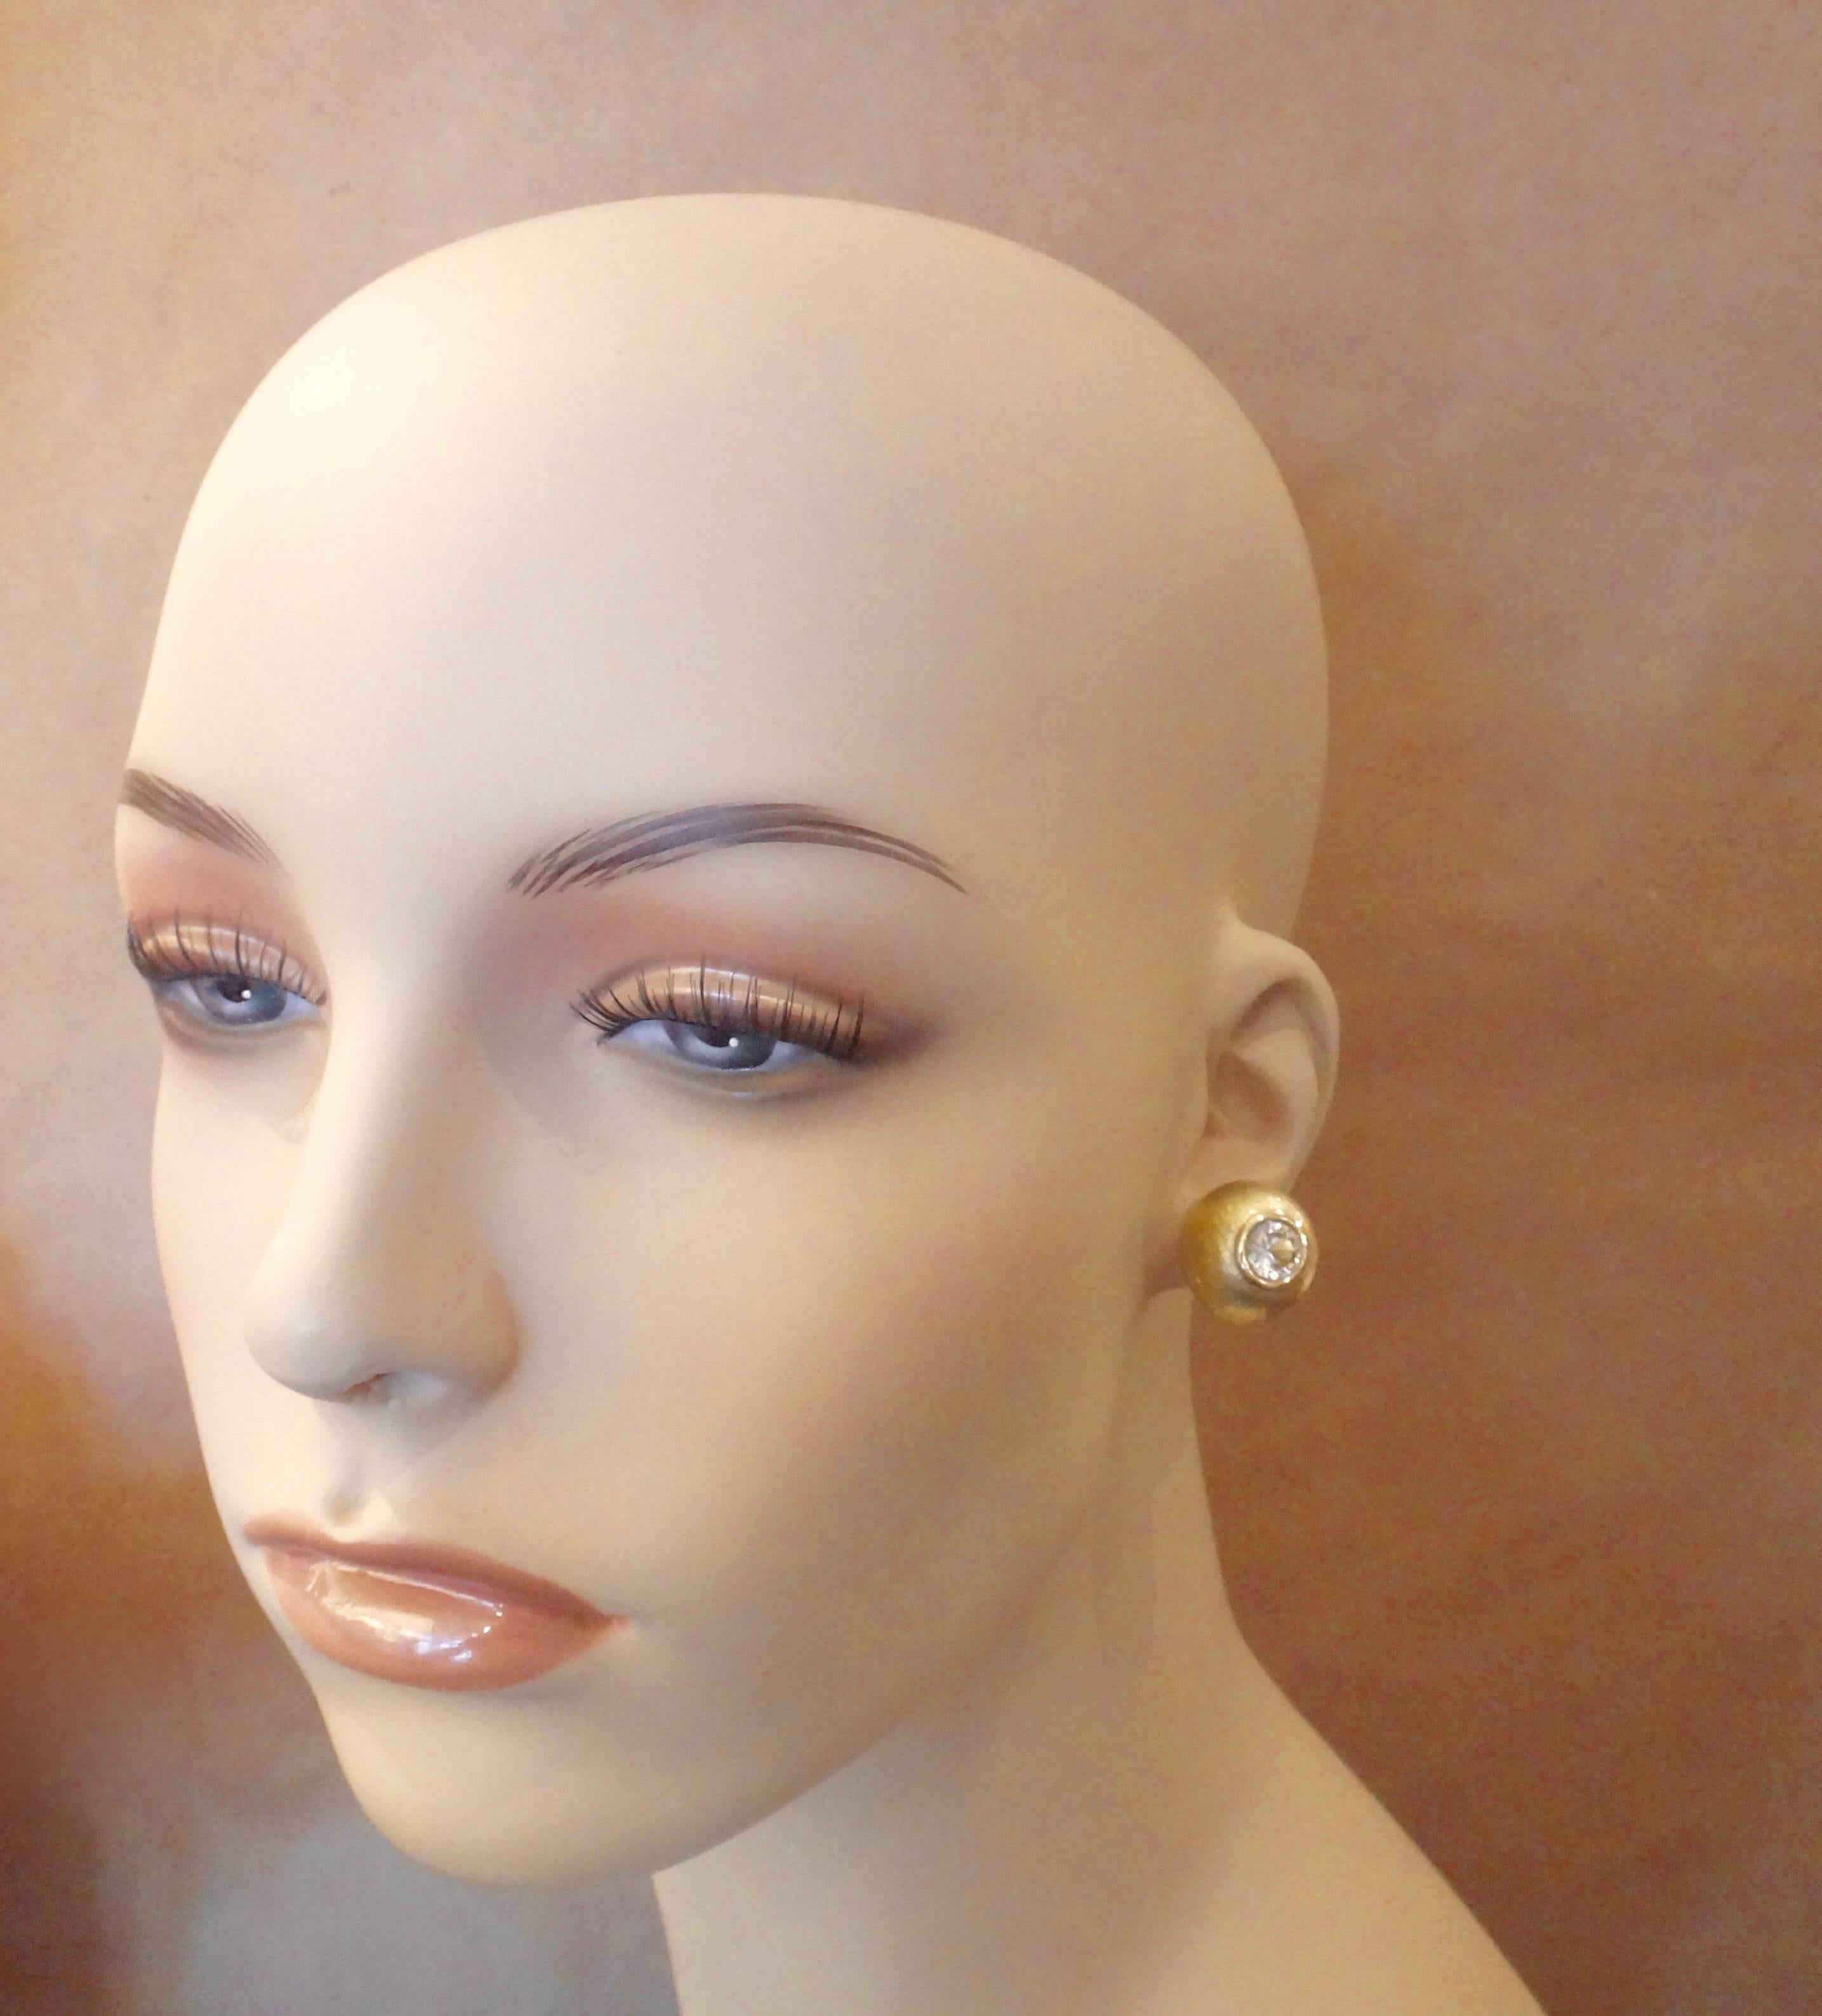 Brilliant cut Silver Sapphires are bezel set in these classic style button earrings.  The hammered 18k yellow gold, high profile domes are a rich satin finish while the bezels are high polished.  These earrings are a great compliment to Michael